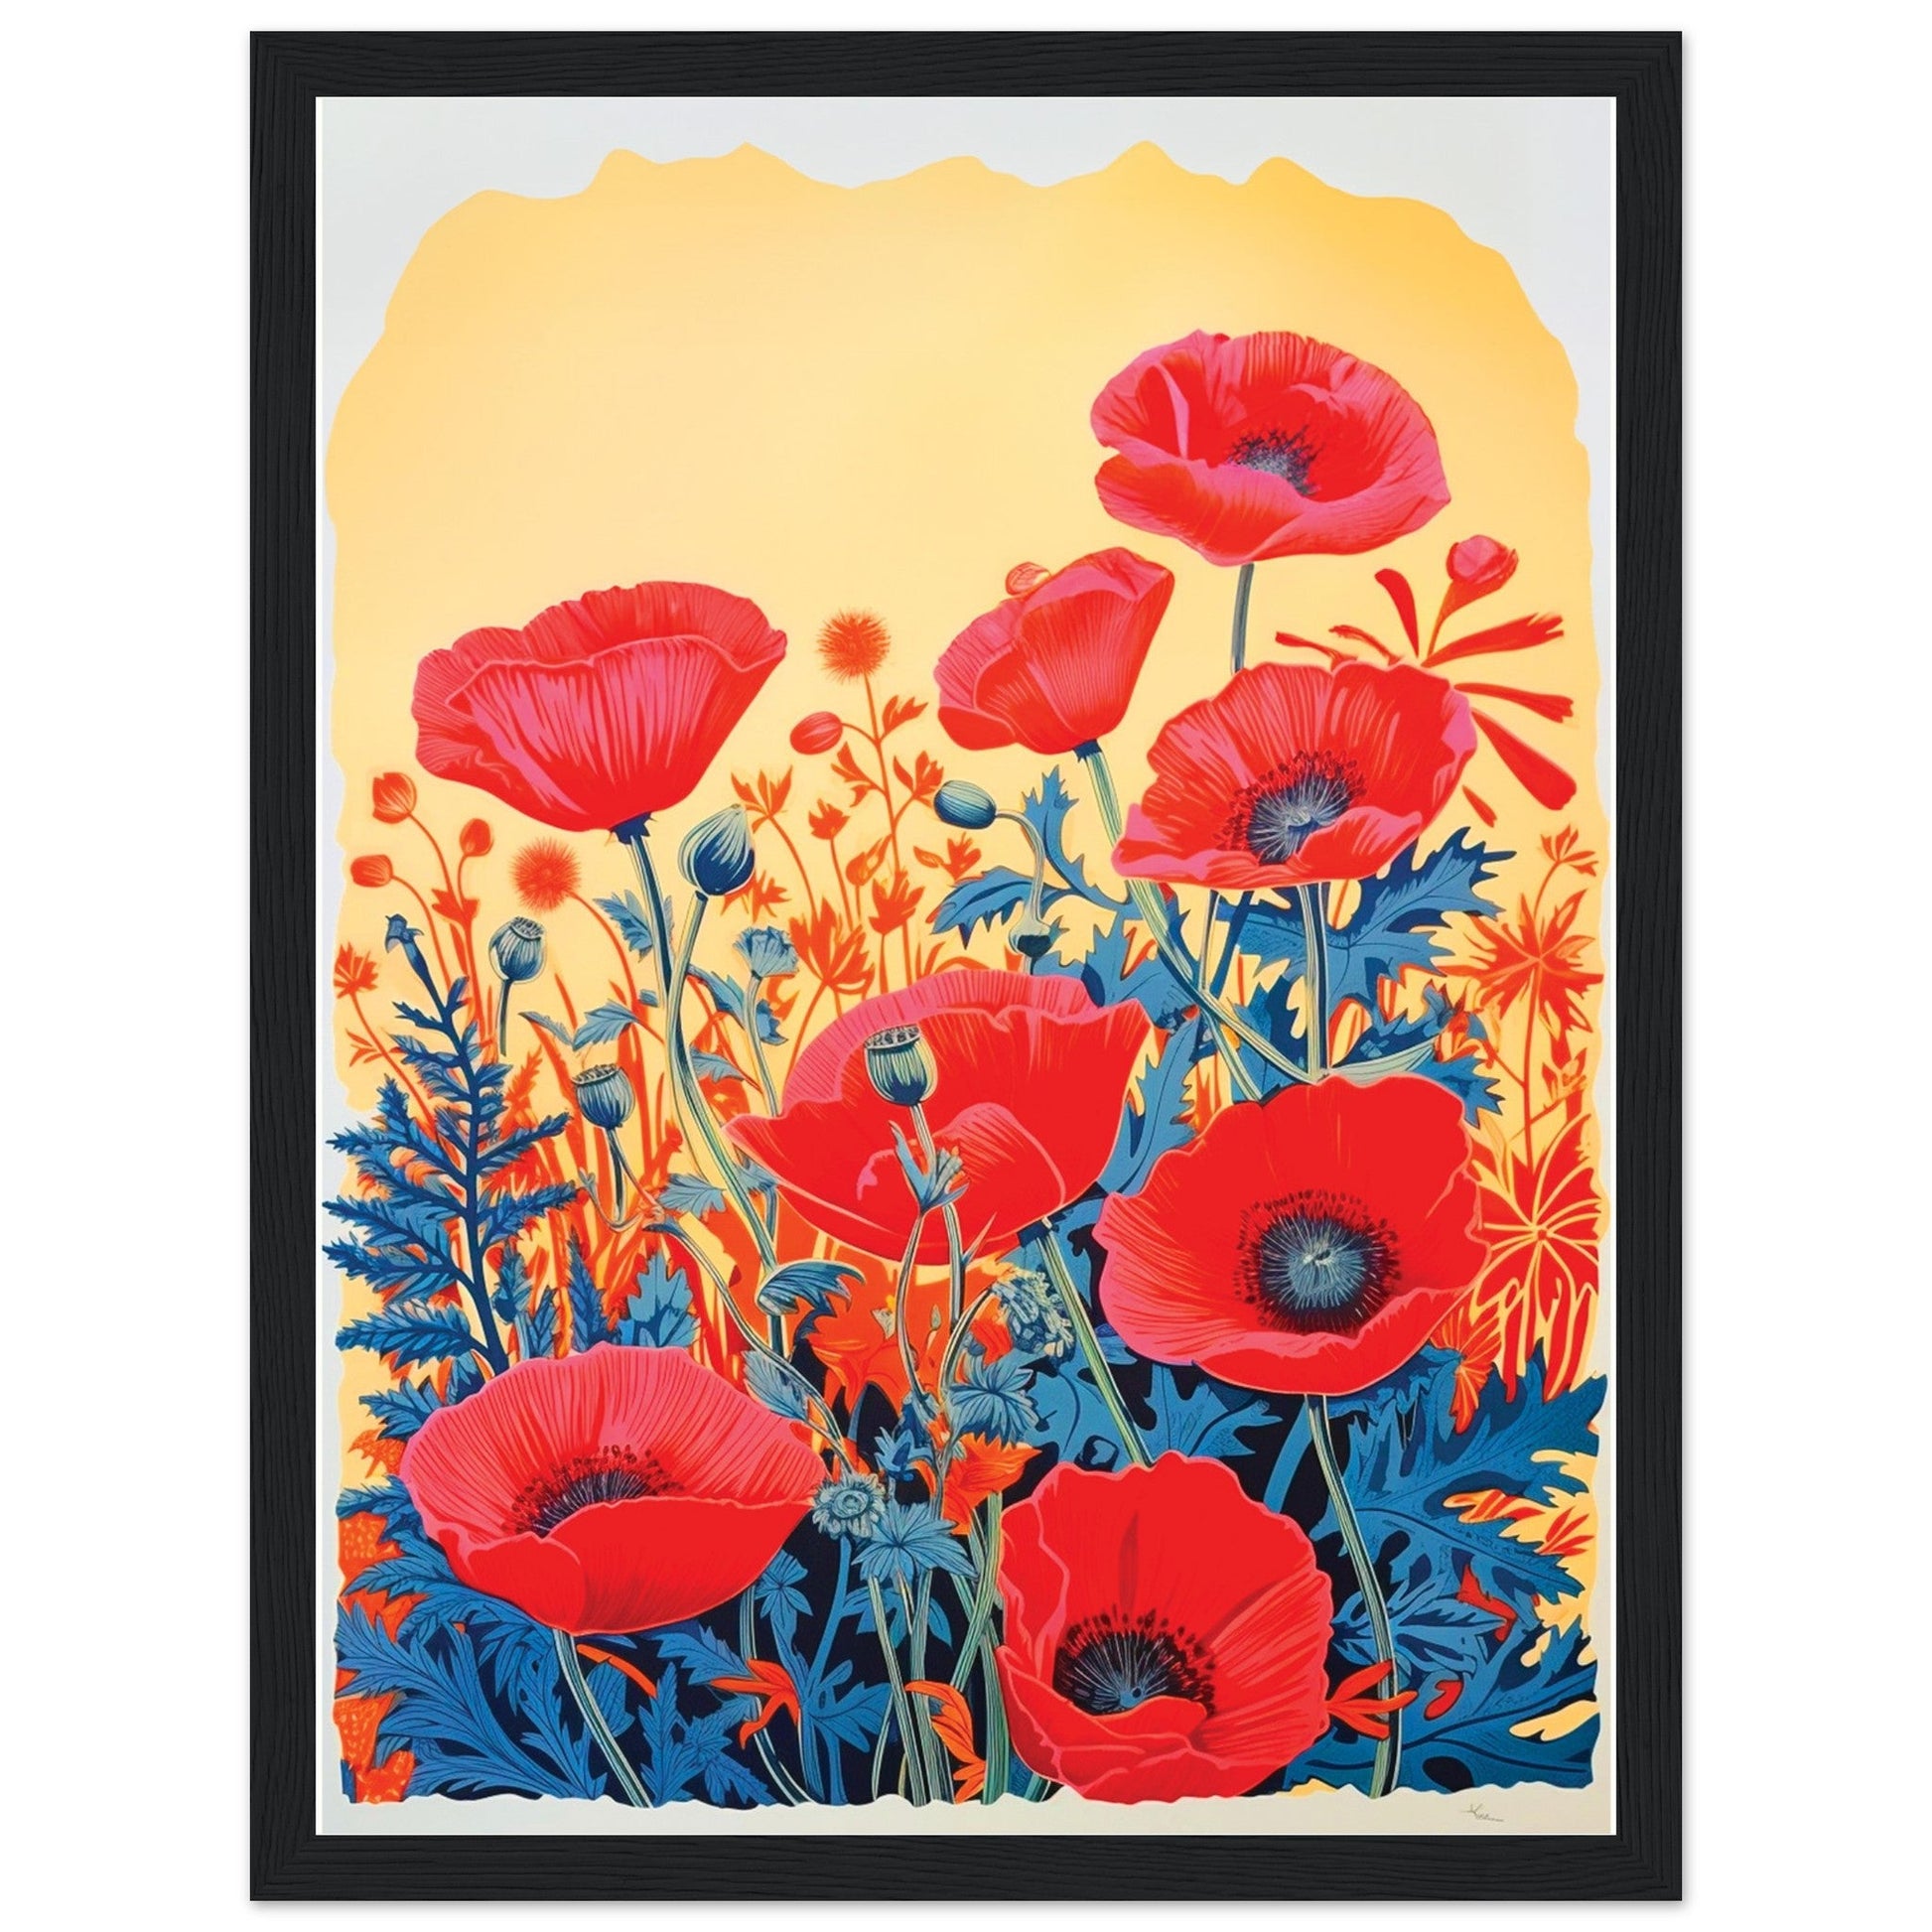 Red Poppies - Wooden Framed Poster, big floral art print, Red Poppies, Risograph Flowers, #illieeart